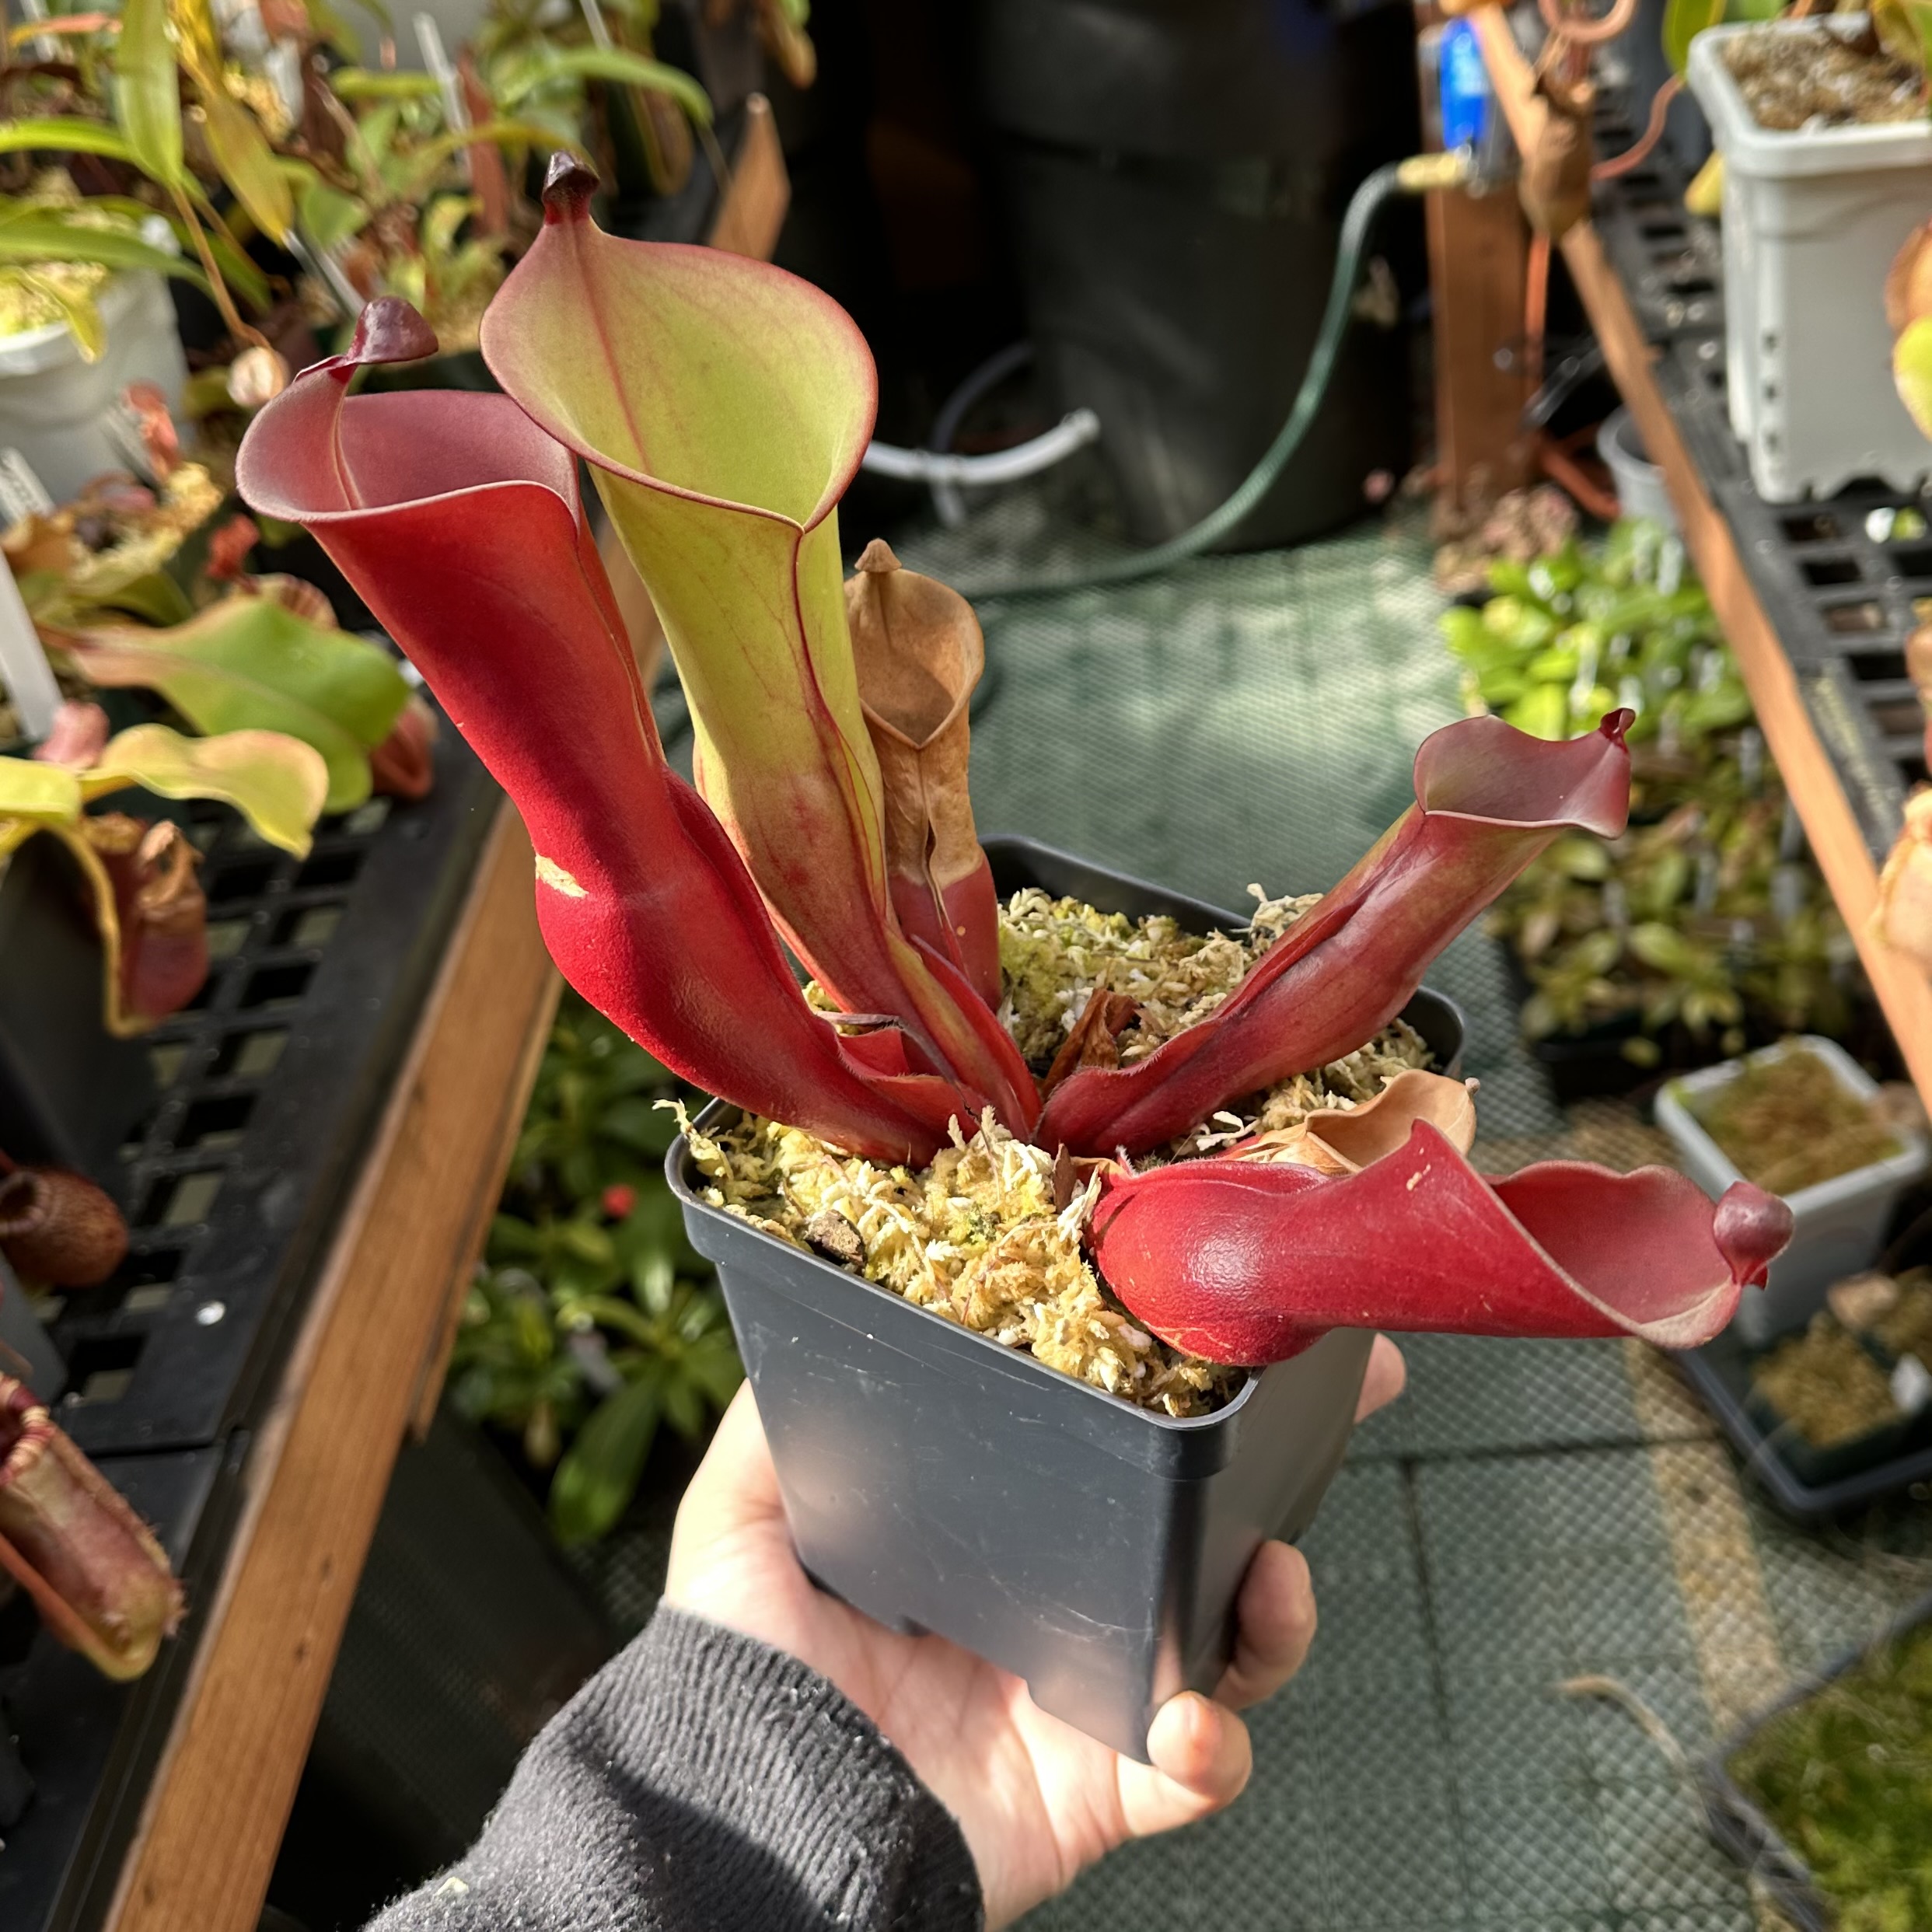 A hand holding Heliamphora purpurascens plants in a black plastic container